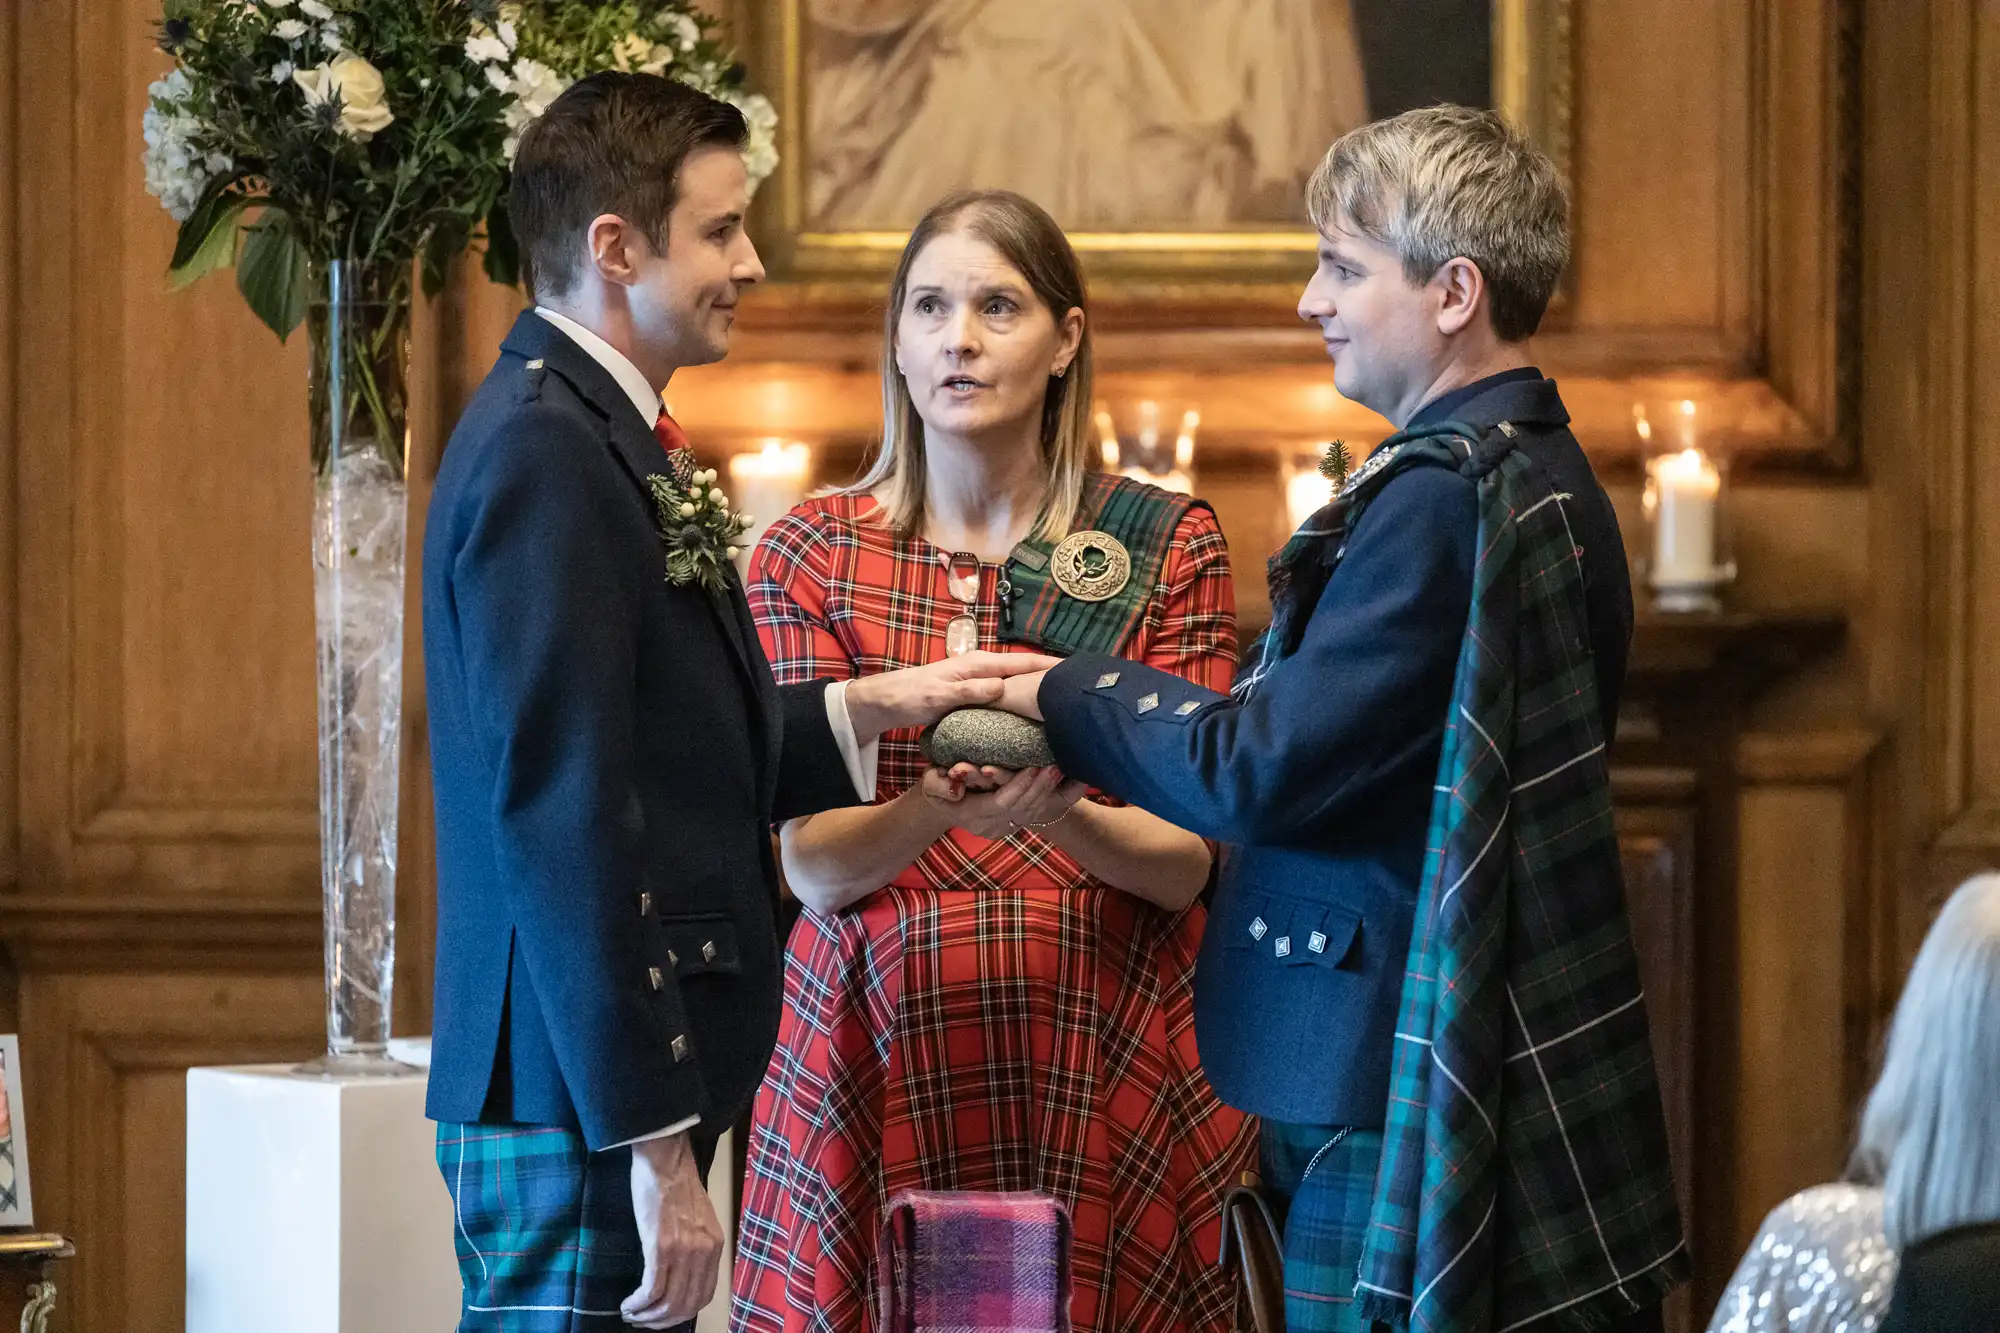 Two grooms in matching tartan attire hold hands during a wedding ceremony officiated by a woman in a red tartan dress, with candles and floral decorations in the background.